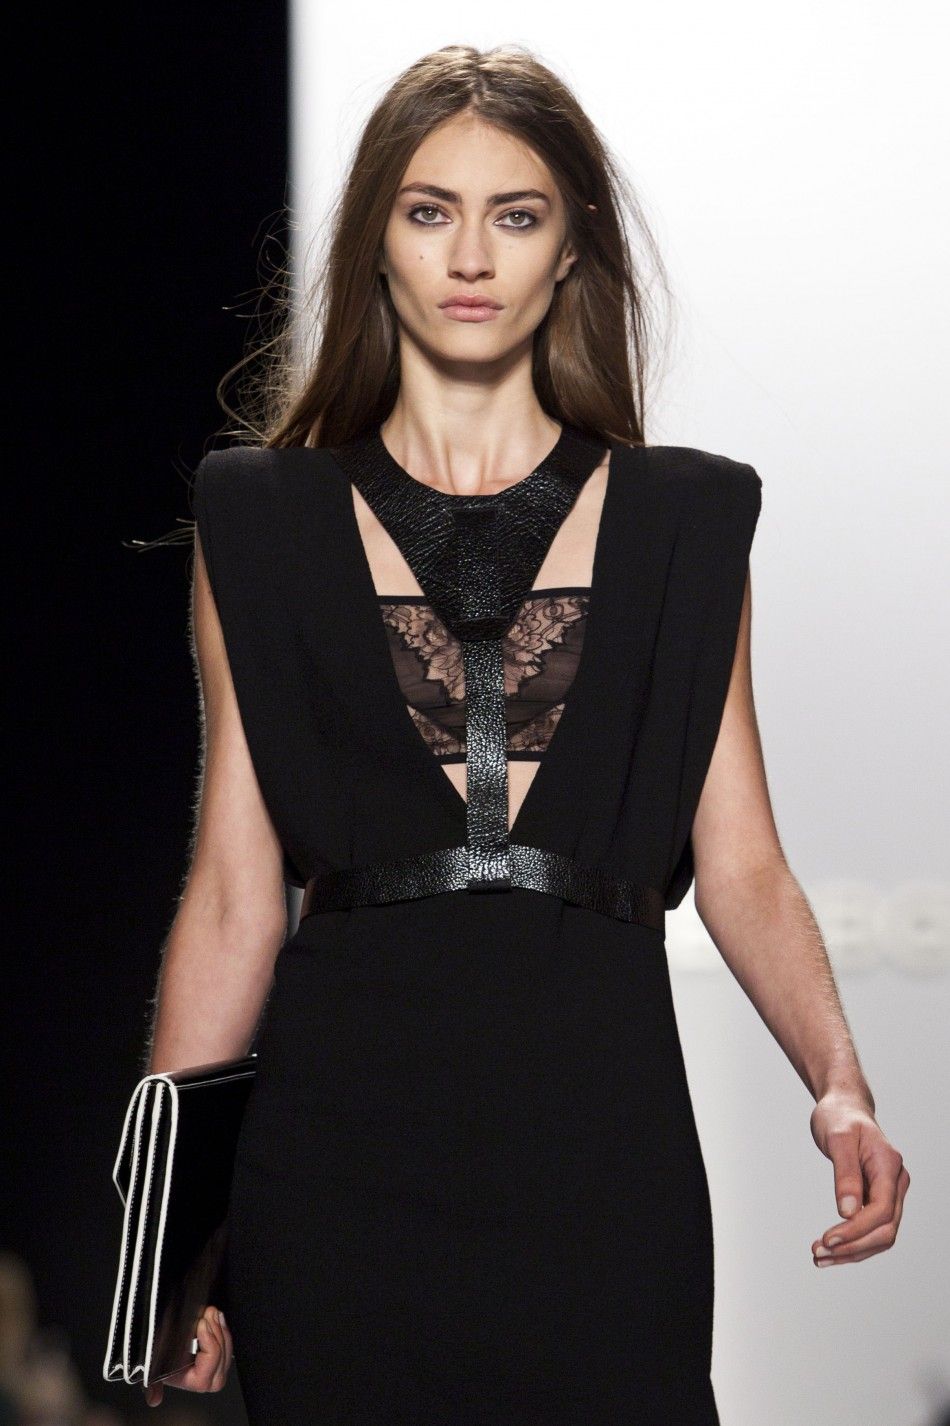 A model presents a creation from the BCBGMAXAZRIA Spring 2013 collection during New York Fashion Week on September 6, 2012. 